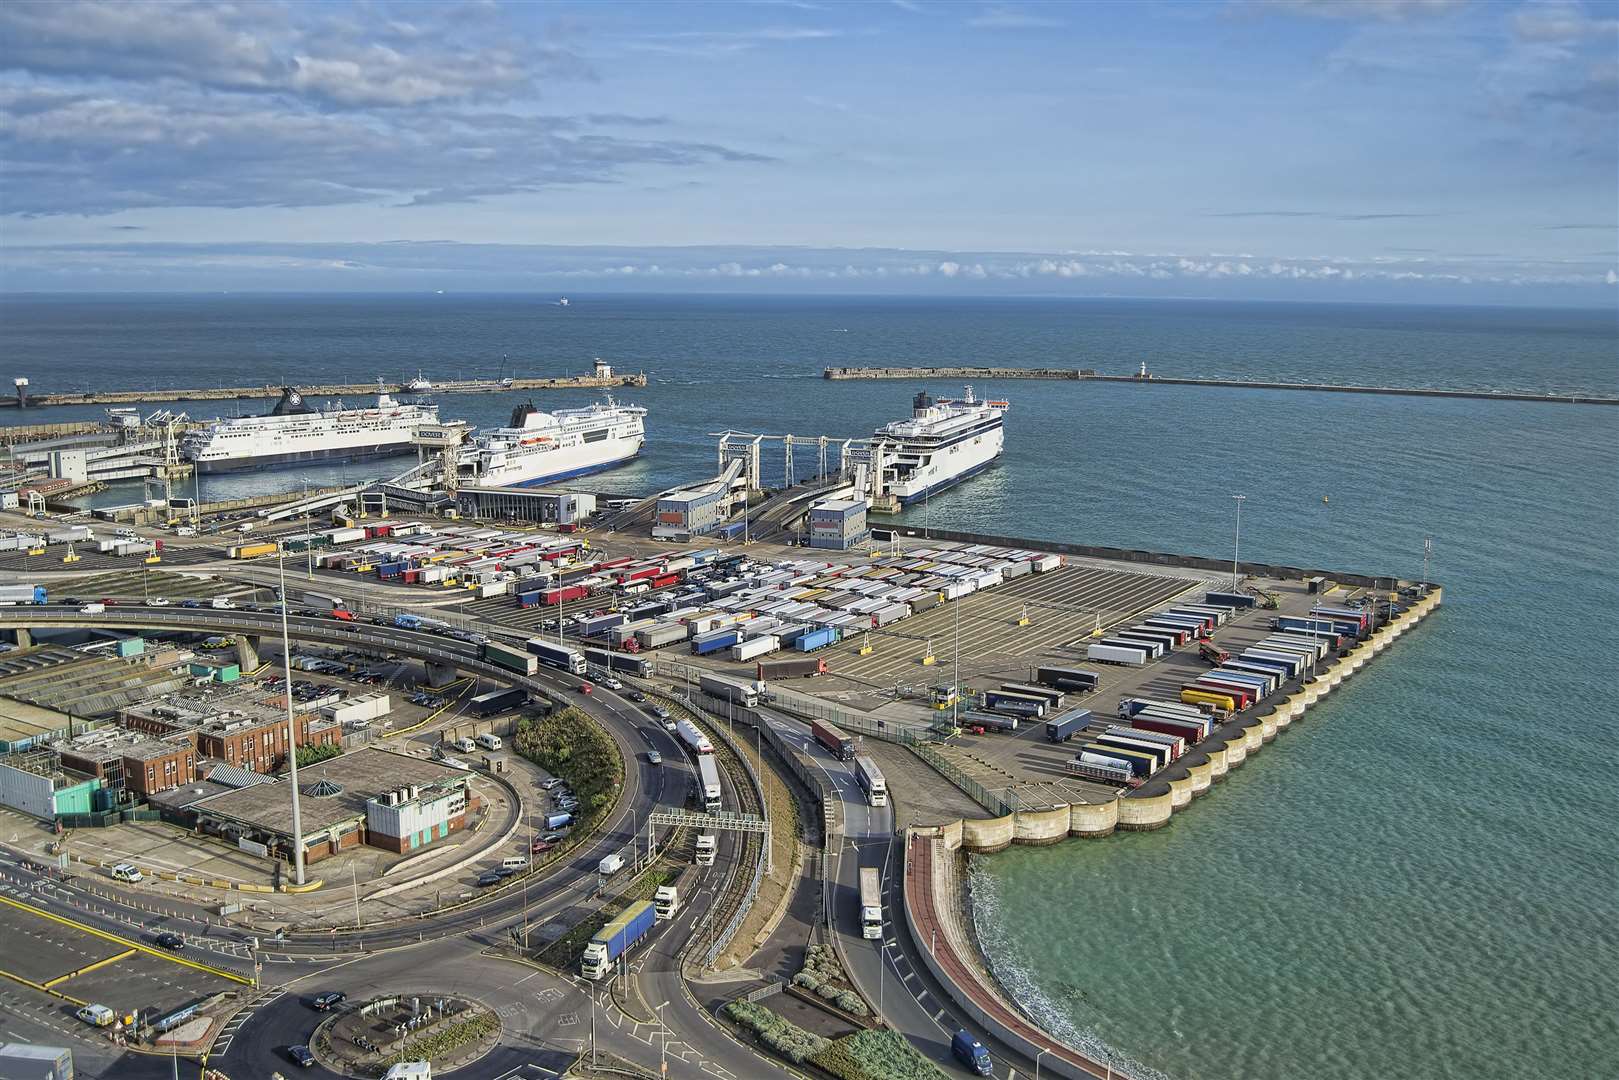 Disruption is expected at Dover as a result of the suspension of services